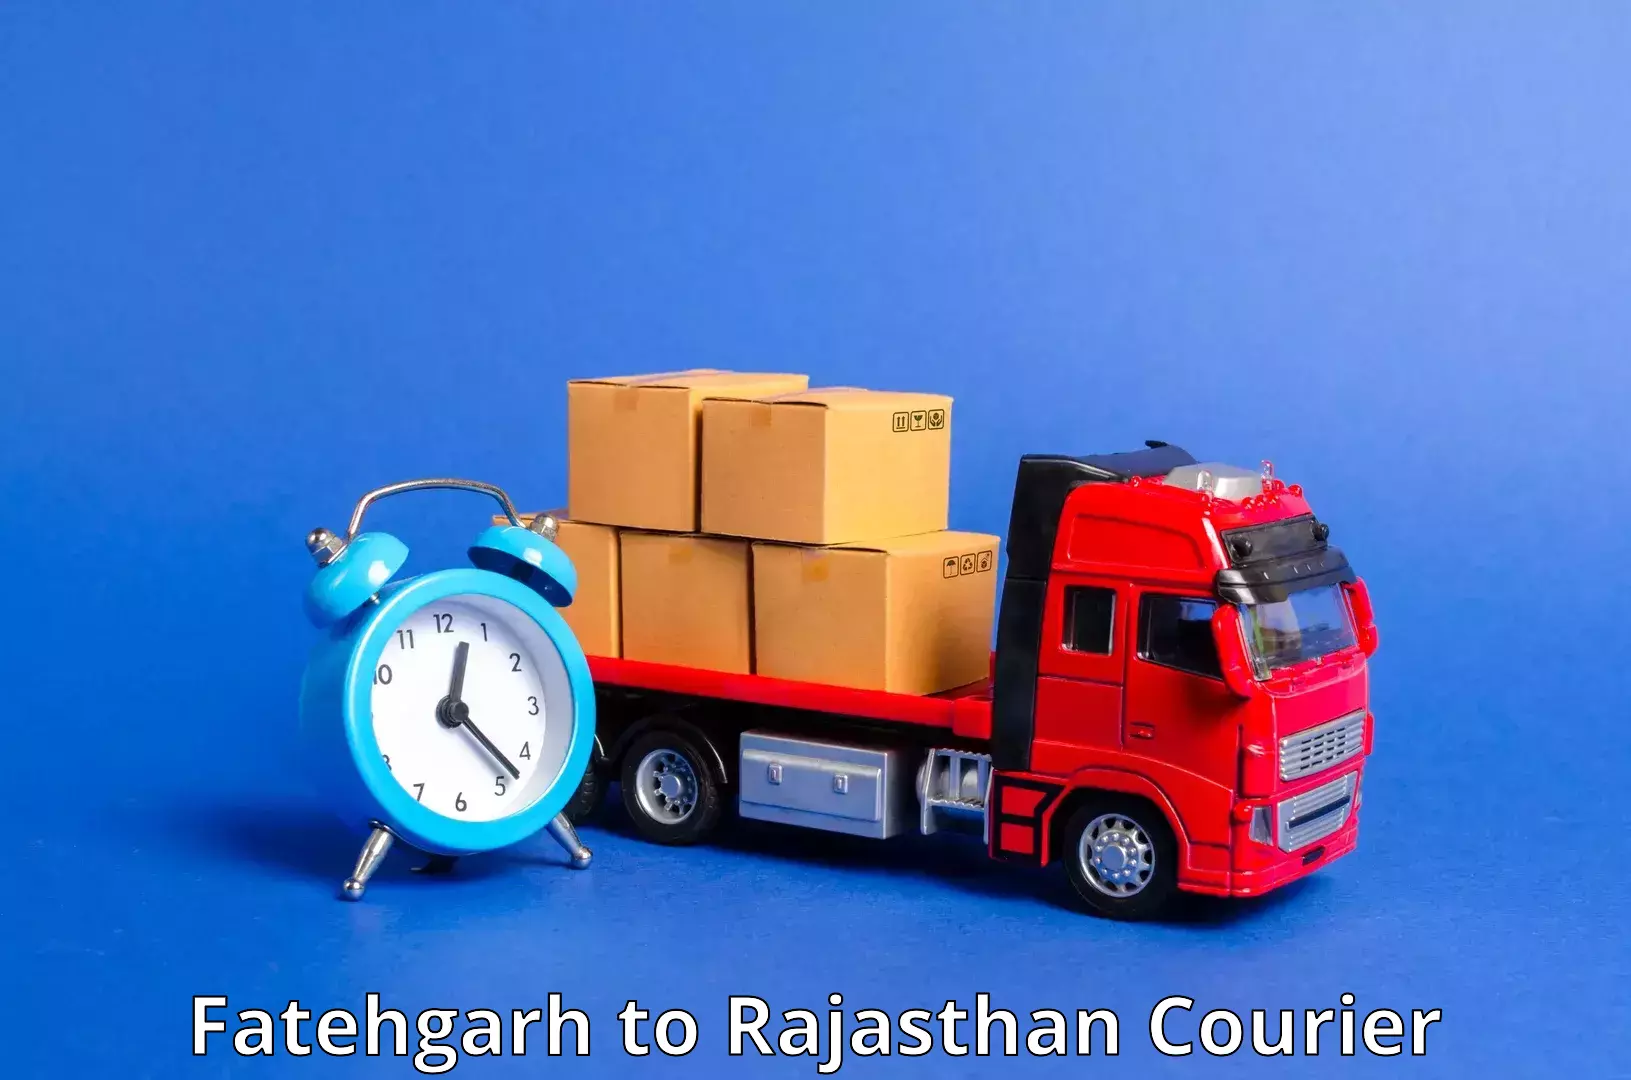 Reliable package handling Fatehgarh to Suratgarh